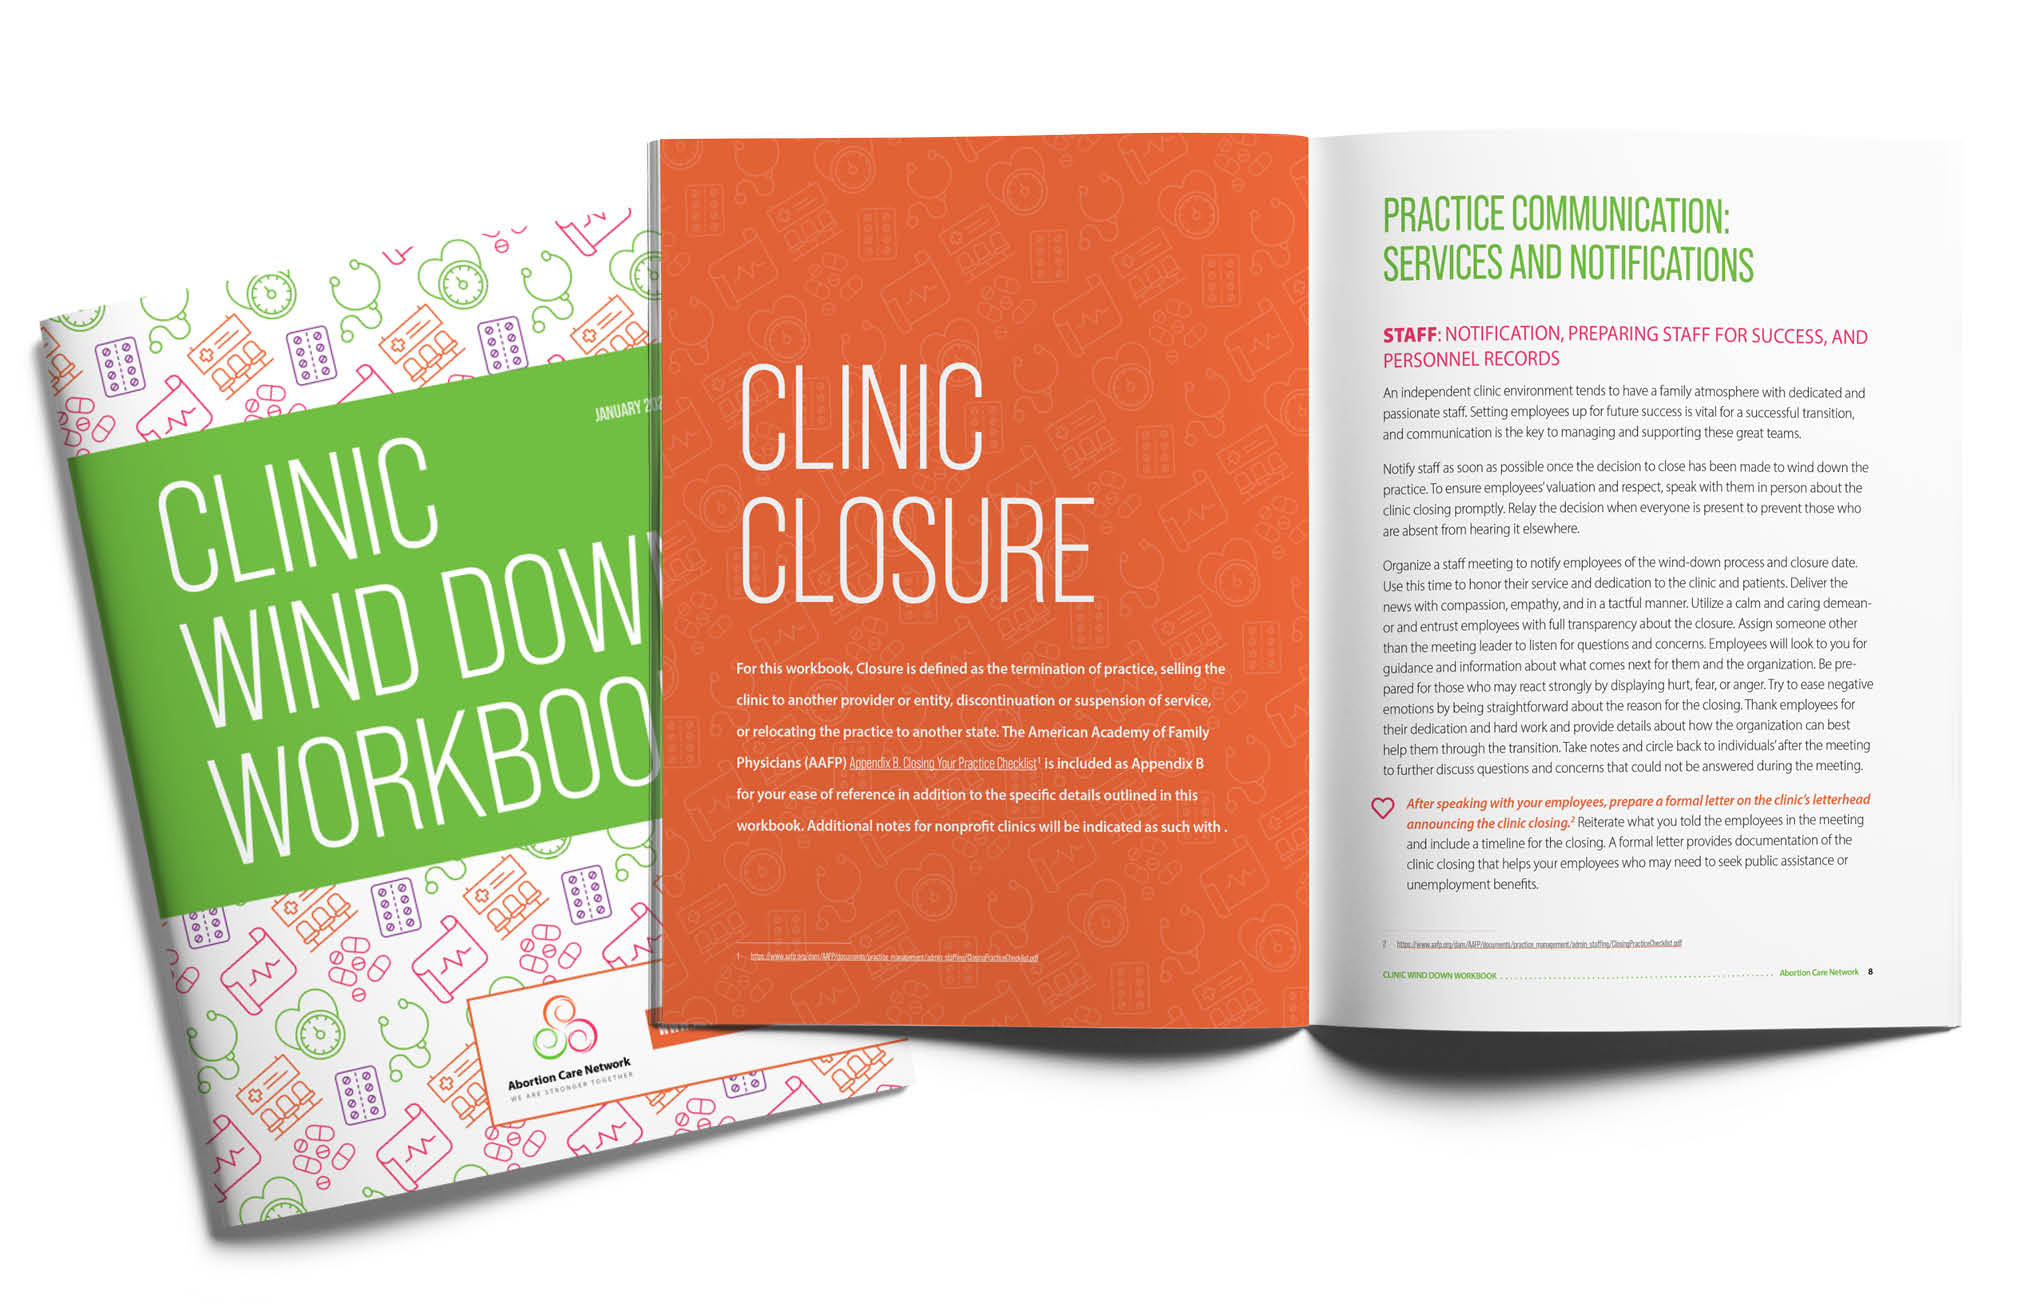 The cover and an inside spread of the Clinic Wind Down Workboook, which guides clinic staff through the processes of shuttering.